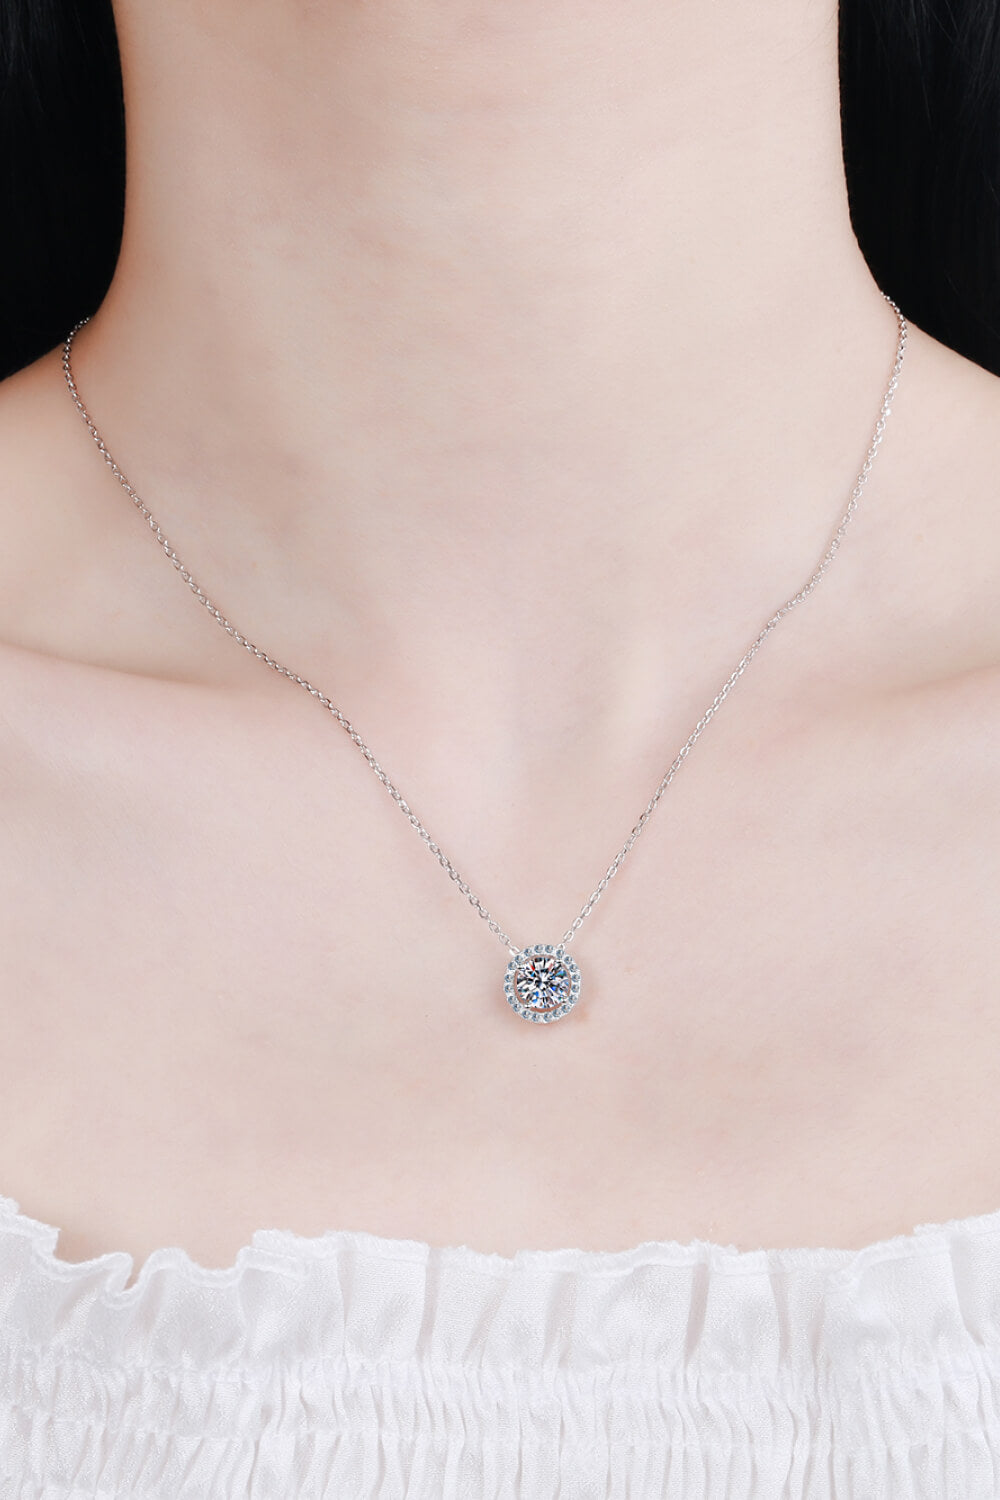 1 Carat Moissanite Round Pendant Chain Necklace - Necklaces - FITGGINS